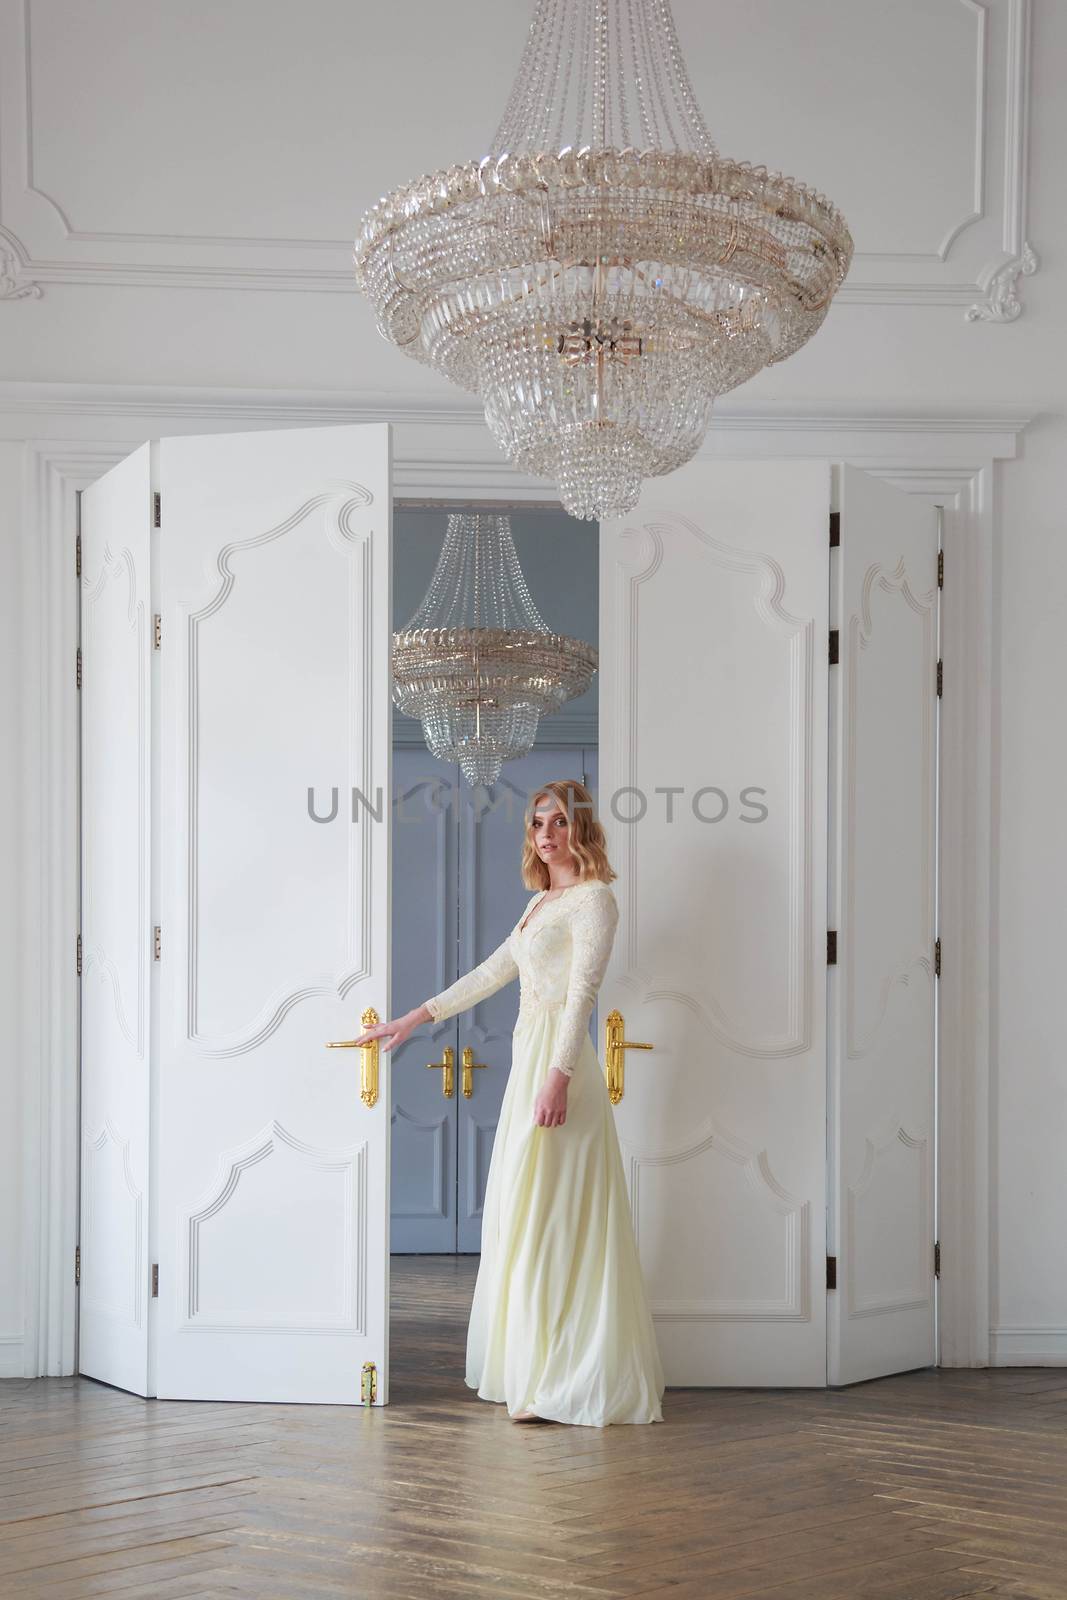 The bride stands at the door in a beautiful white room by galinasharapova